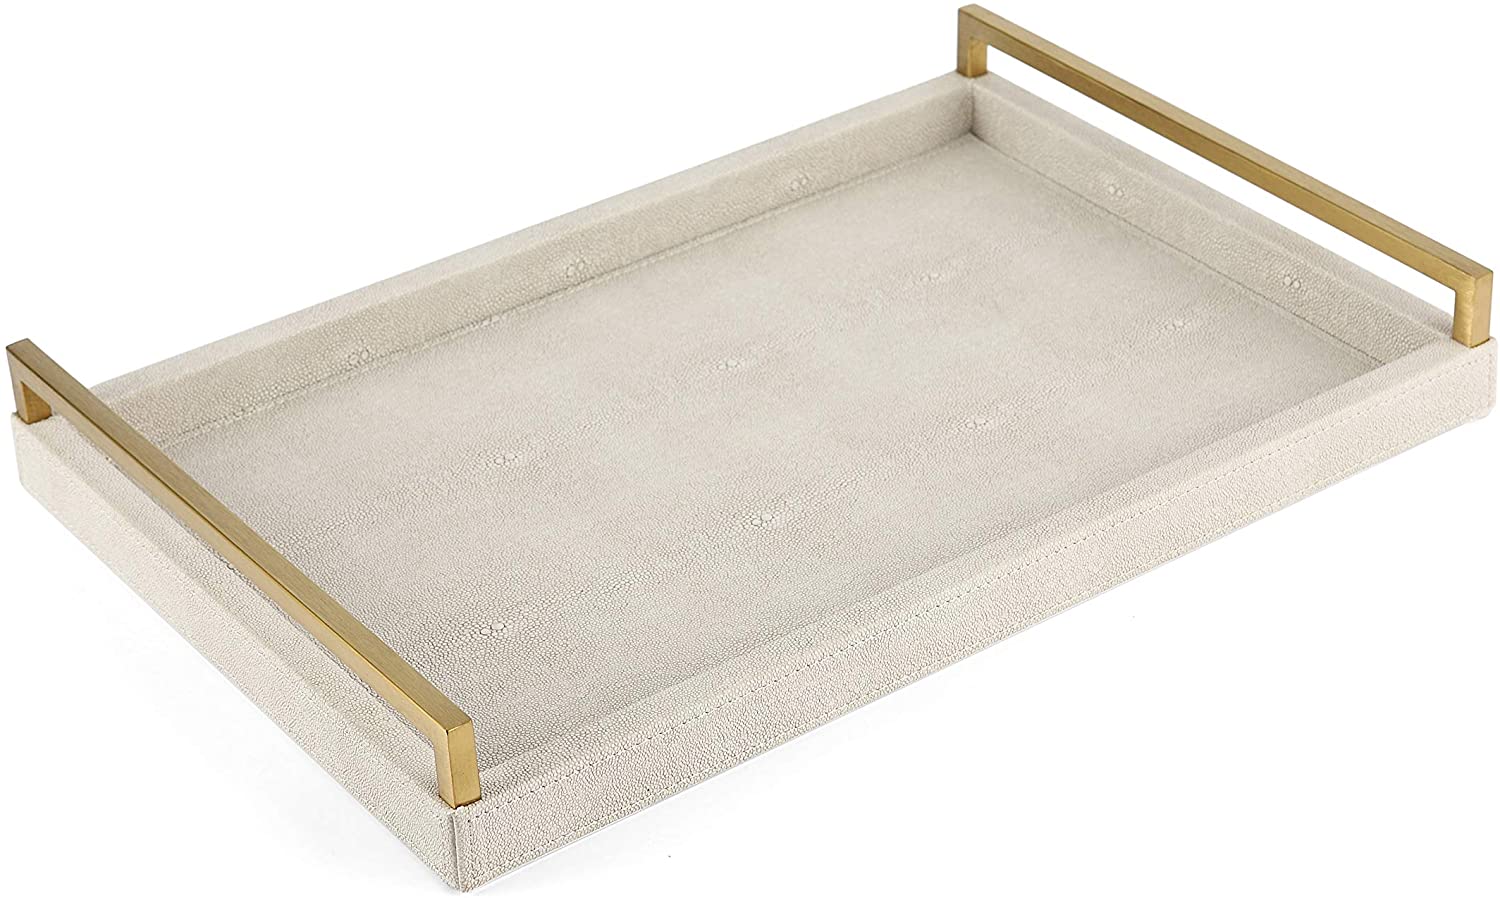 5. WV Ivory Faux Shargreen Tray 